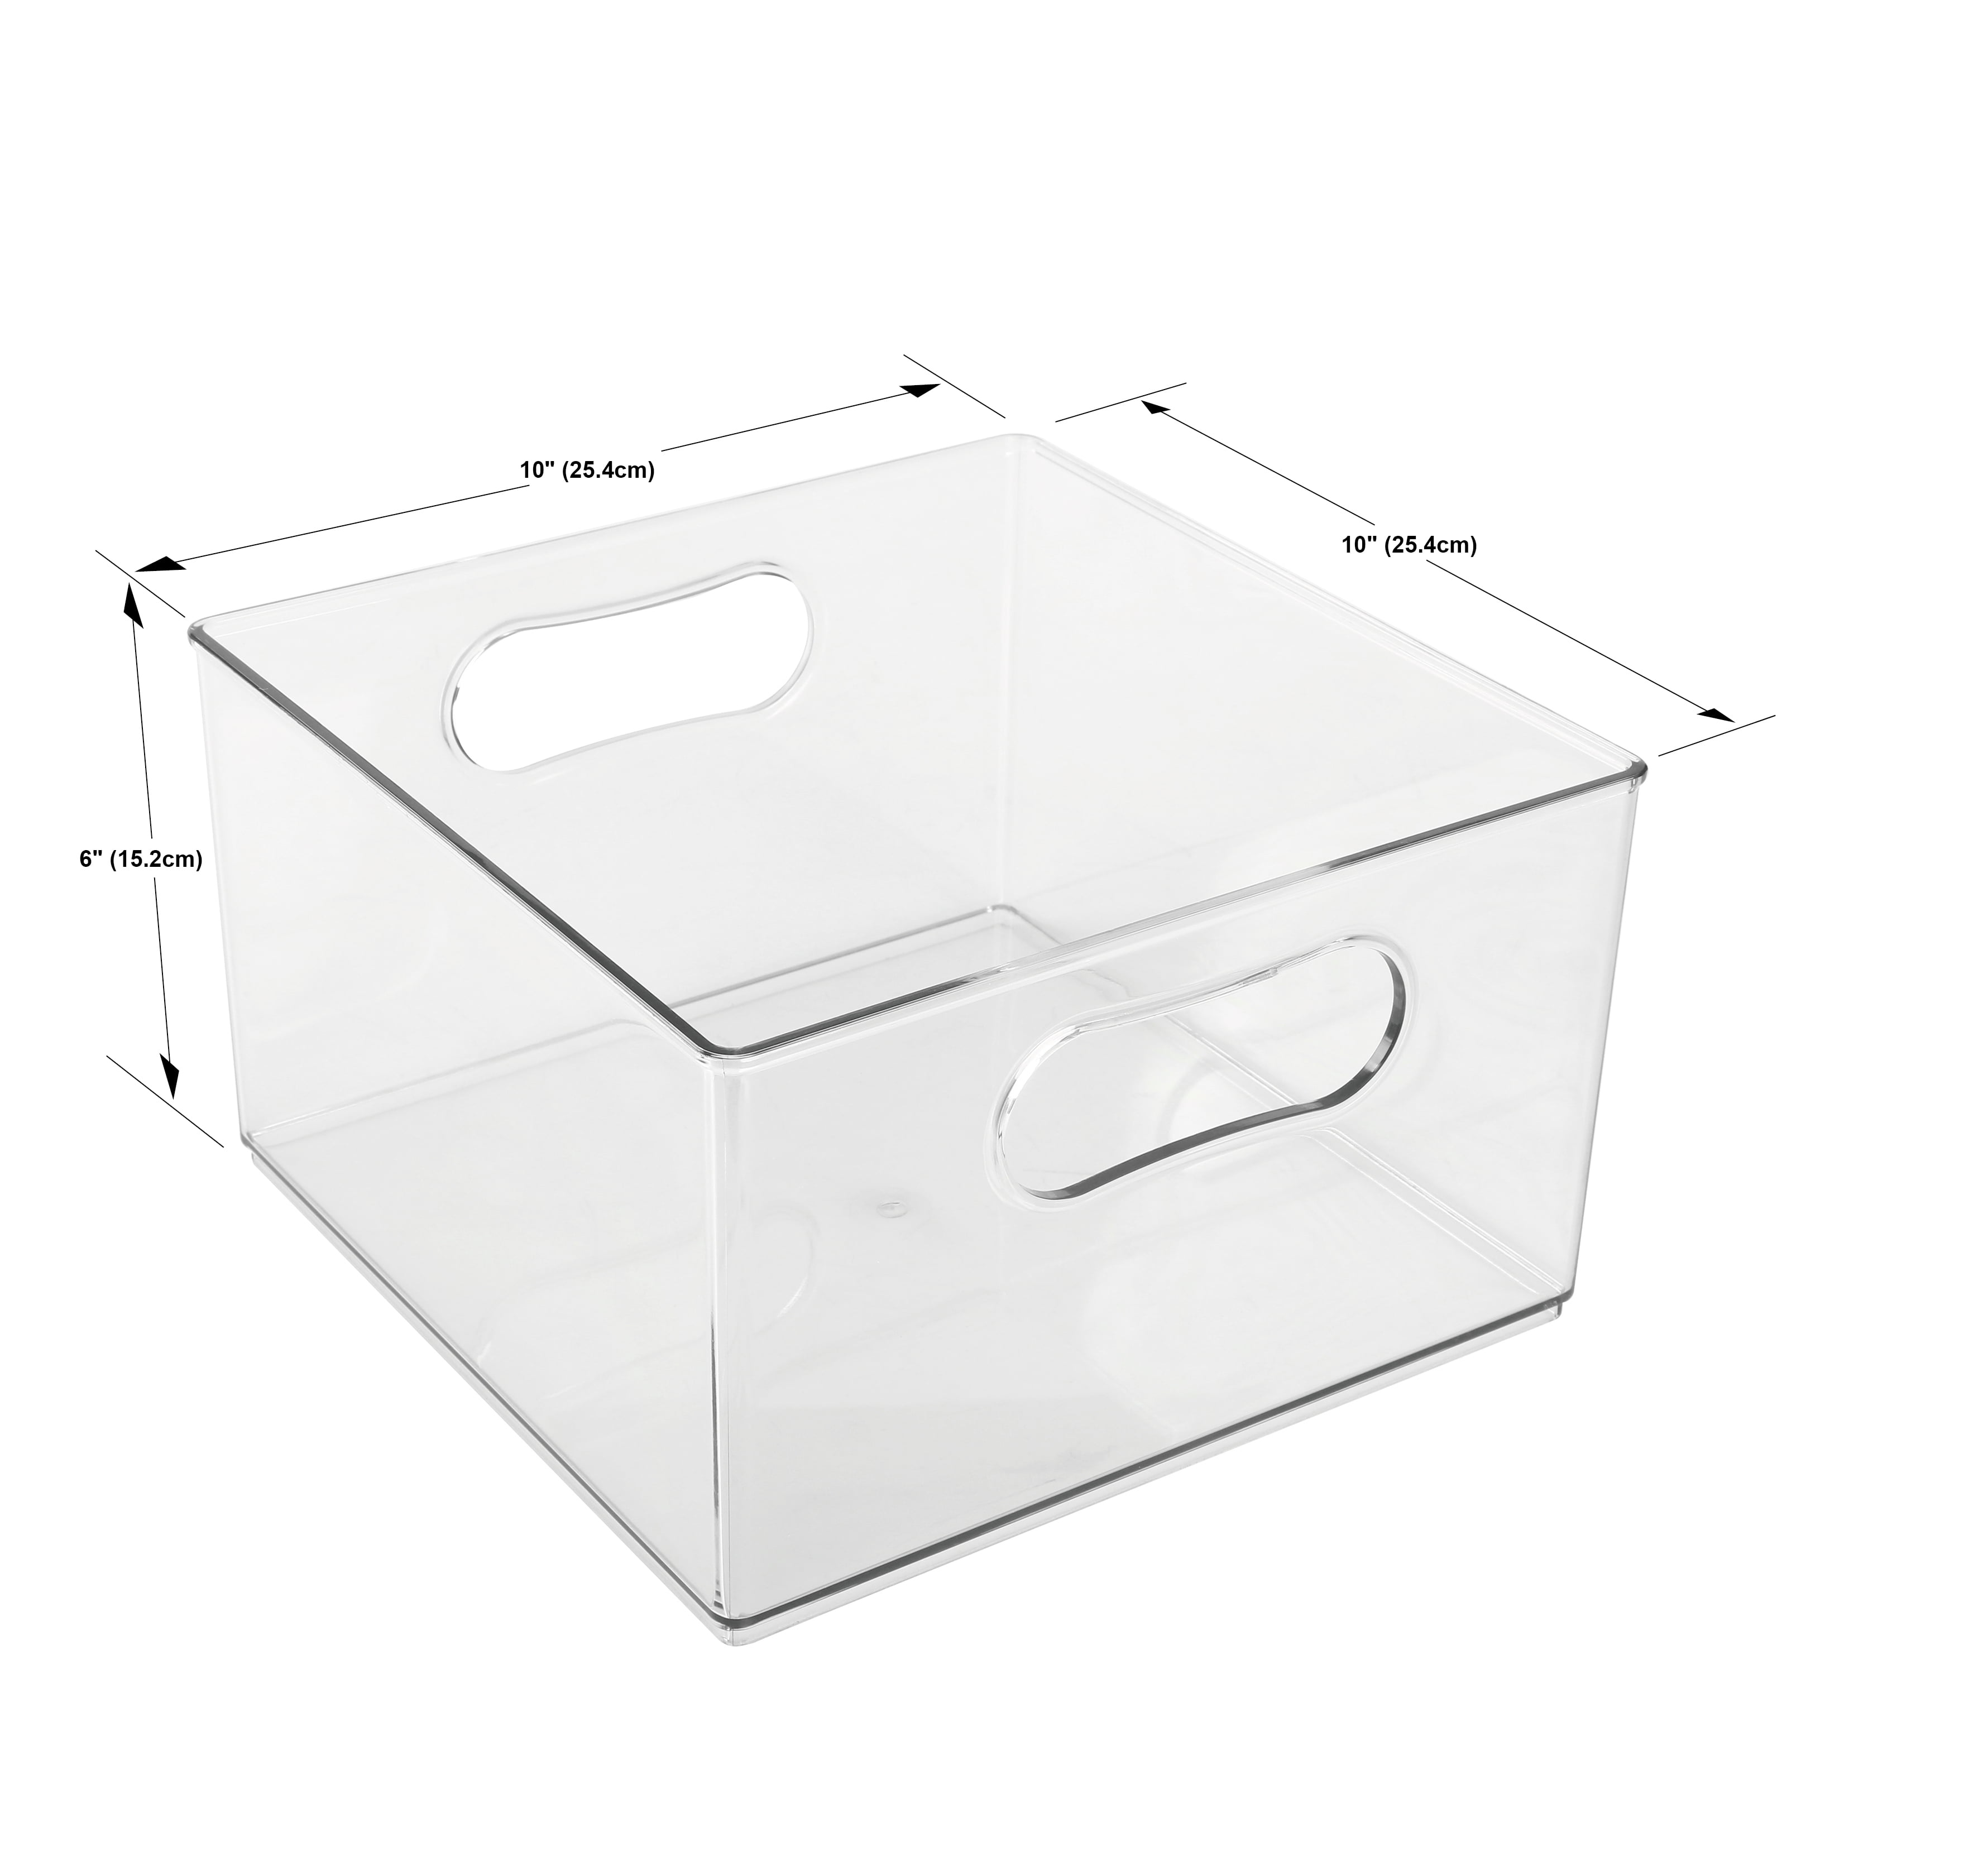 The Home Edit Large Bin 10 in Plastic Modular Storage System 2 Pack Organizer Clear